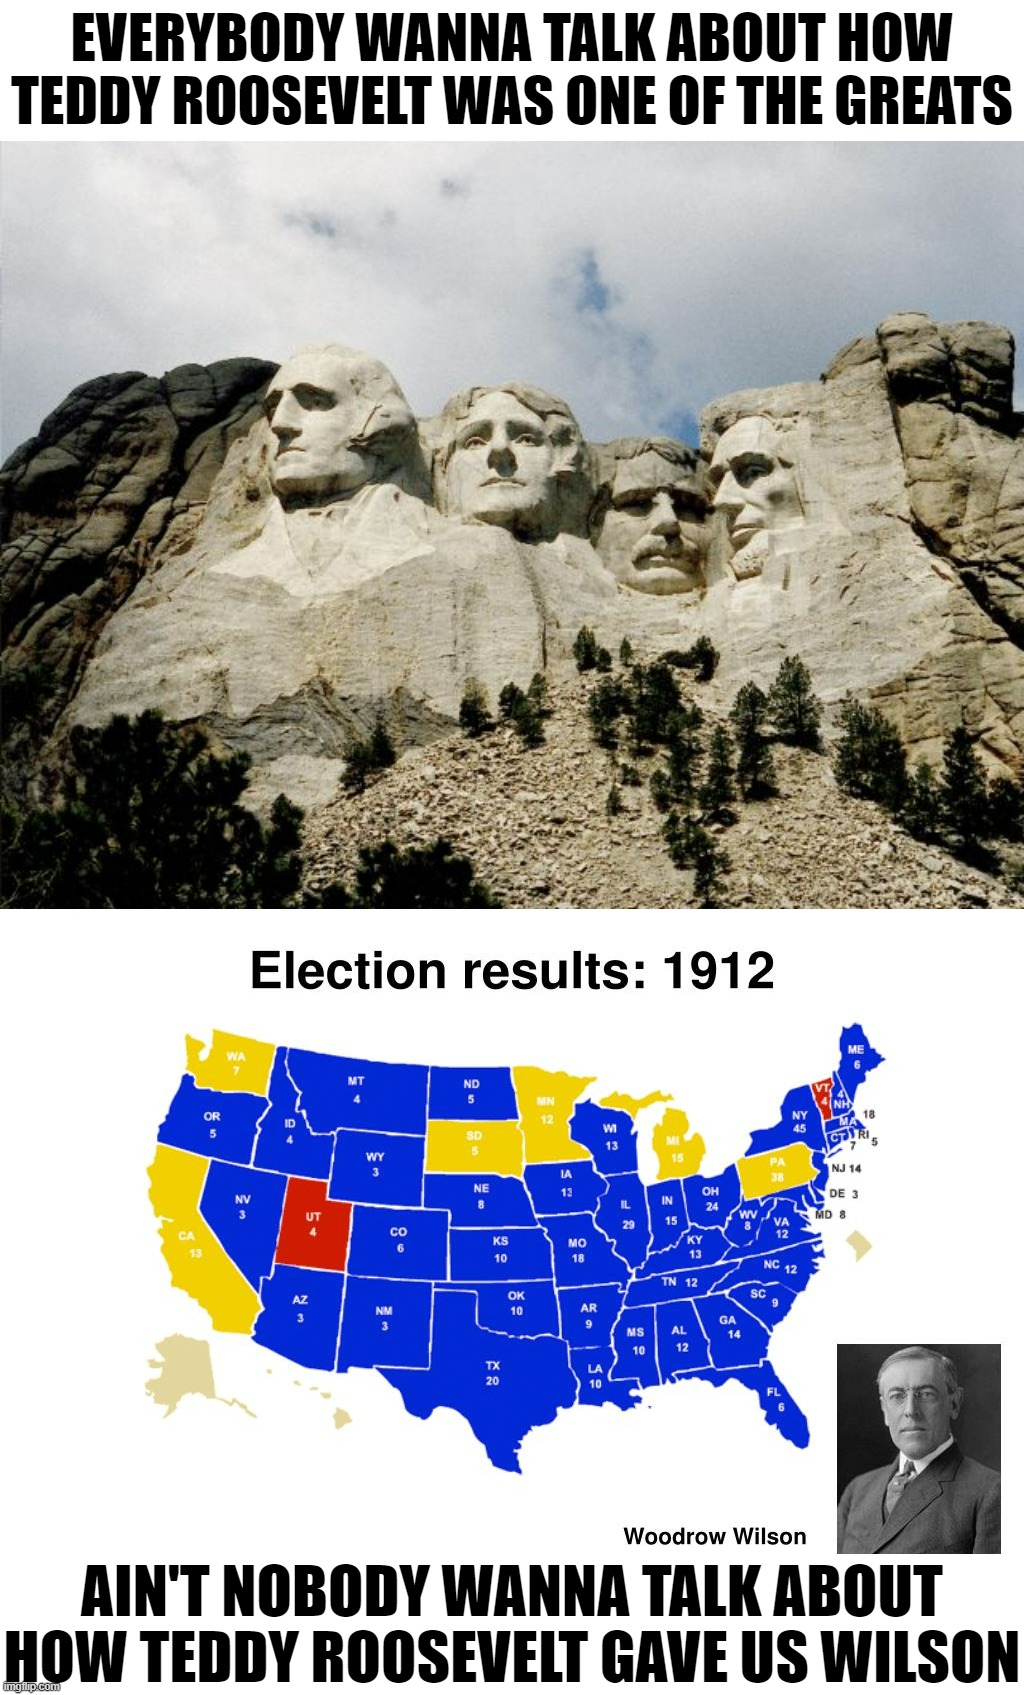 T.R. ran third-party against his own handpicked successor, William Howard Taft, fatally splitting the Republican vote. | EVERYBODY WANNA TALK ABOUT HOW TEDDY ROOSEVELT WAS ONE OF THE GREATS; AIN'T NOBODY WANNA TALK ABOUT HOW TEDDY ROOSEVELT GAVE US WILSON | image tagged in mount rushmore,election of 1912,teddy roosevelt,roosevelt,woodrow wilson,republican party | made w/ Imgflip meme maker